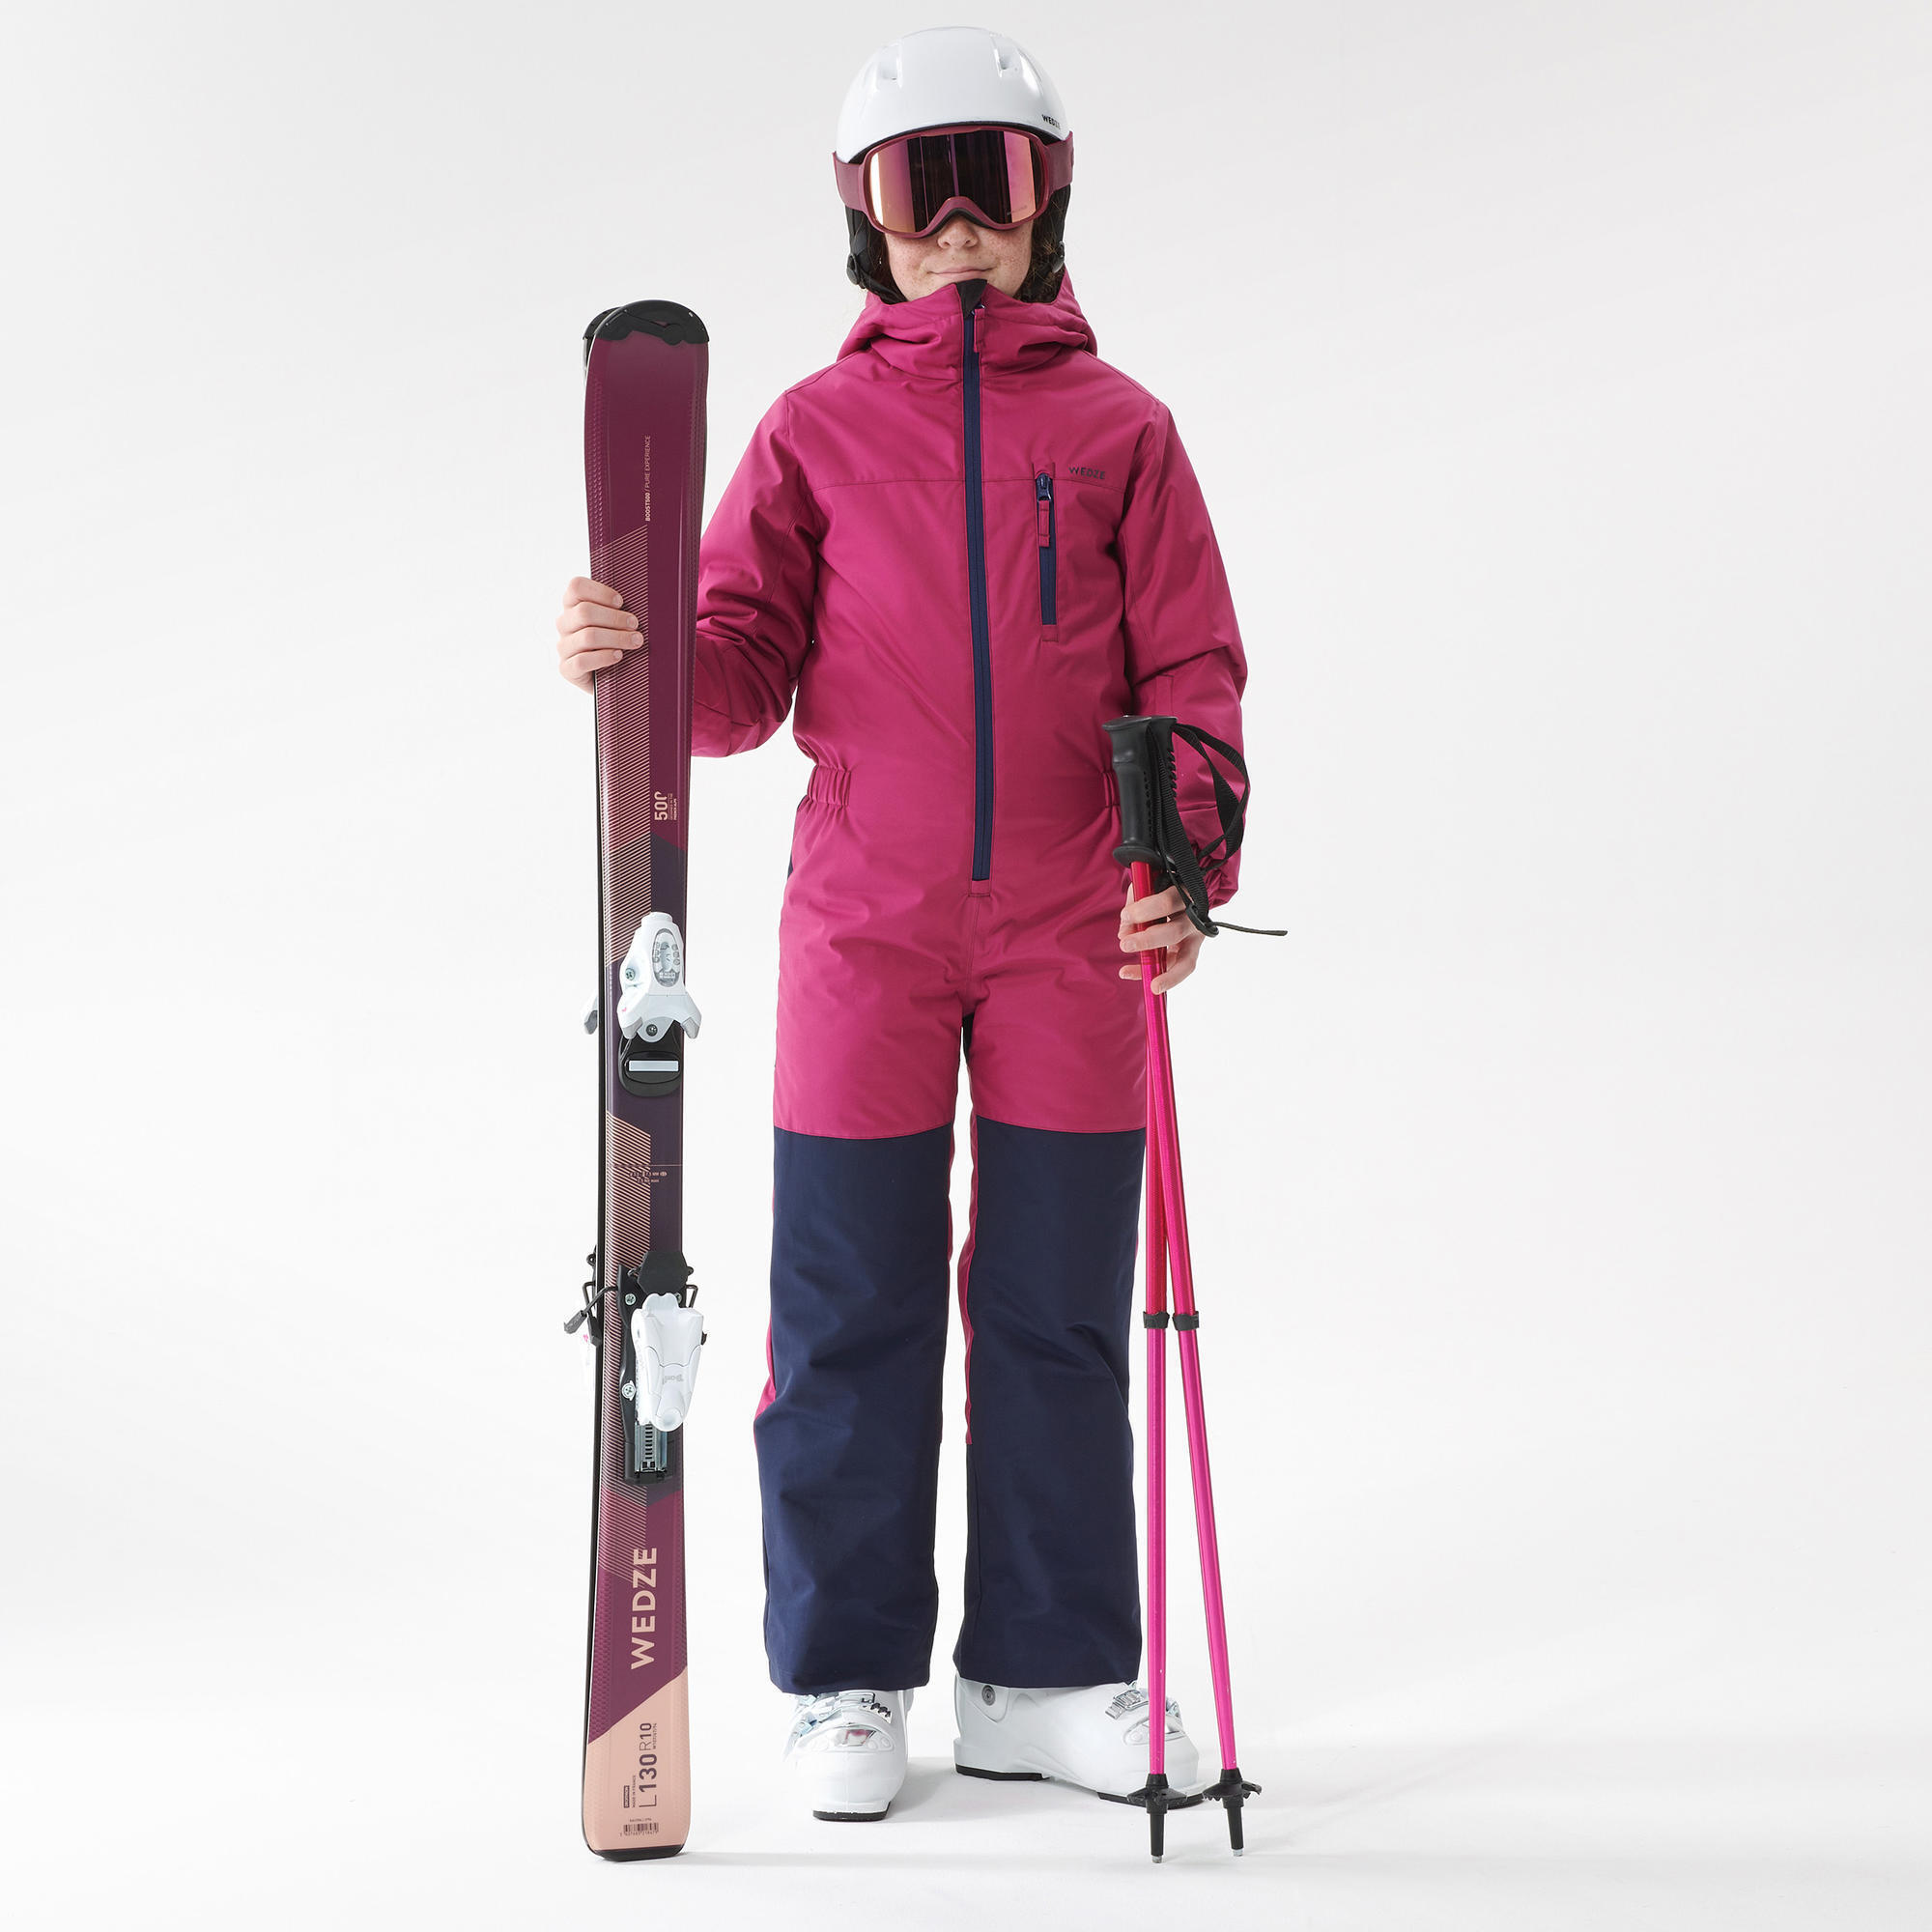 KIDS’ WARM AND WATERPROOF SKI SUIT - 100 - PINK AND NAVY BLUE  5/6